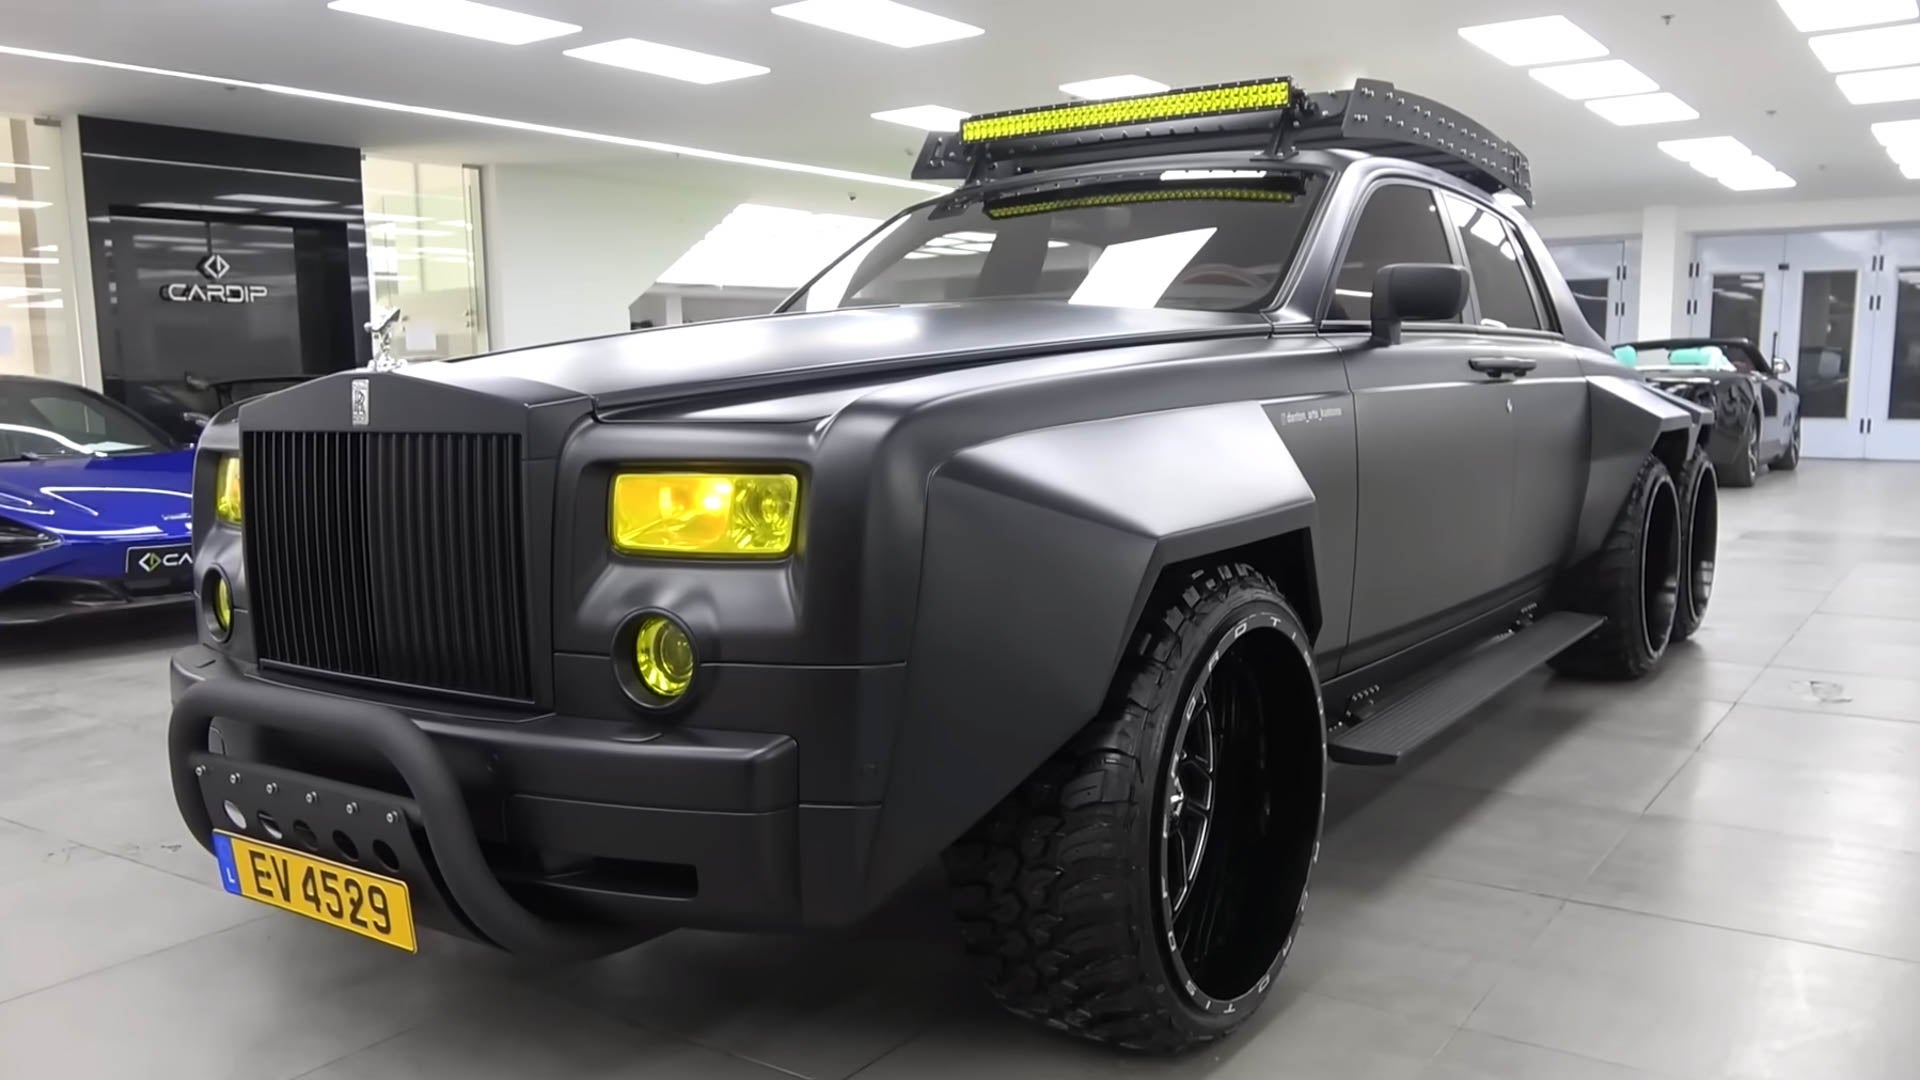 This Rolls Royce Phantom 6x6 Will Bring Luxury to a Post Apocalyptic